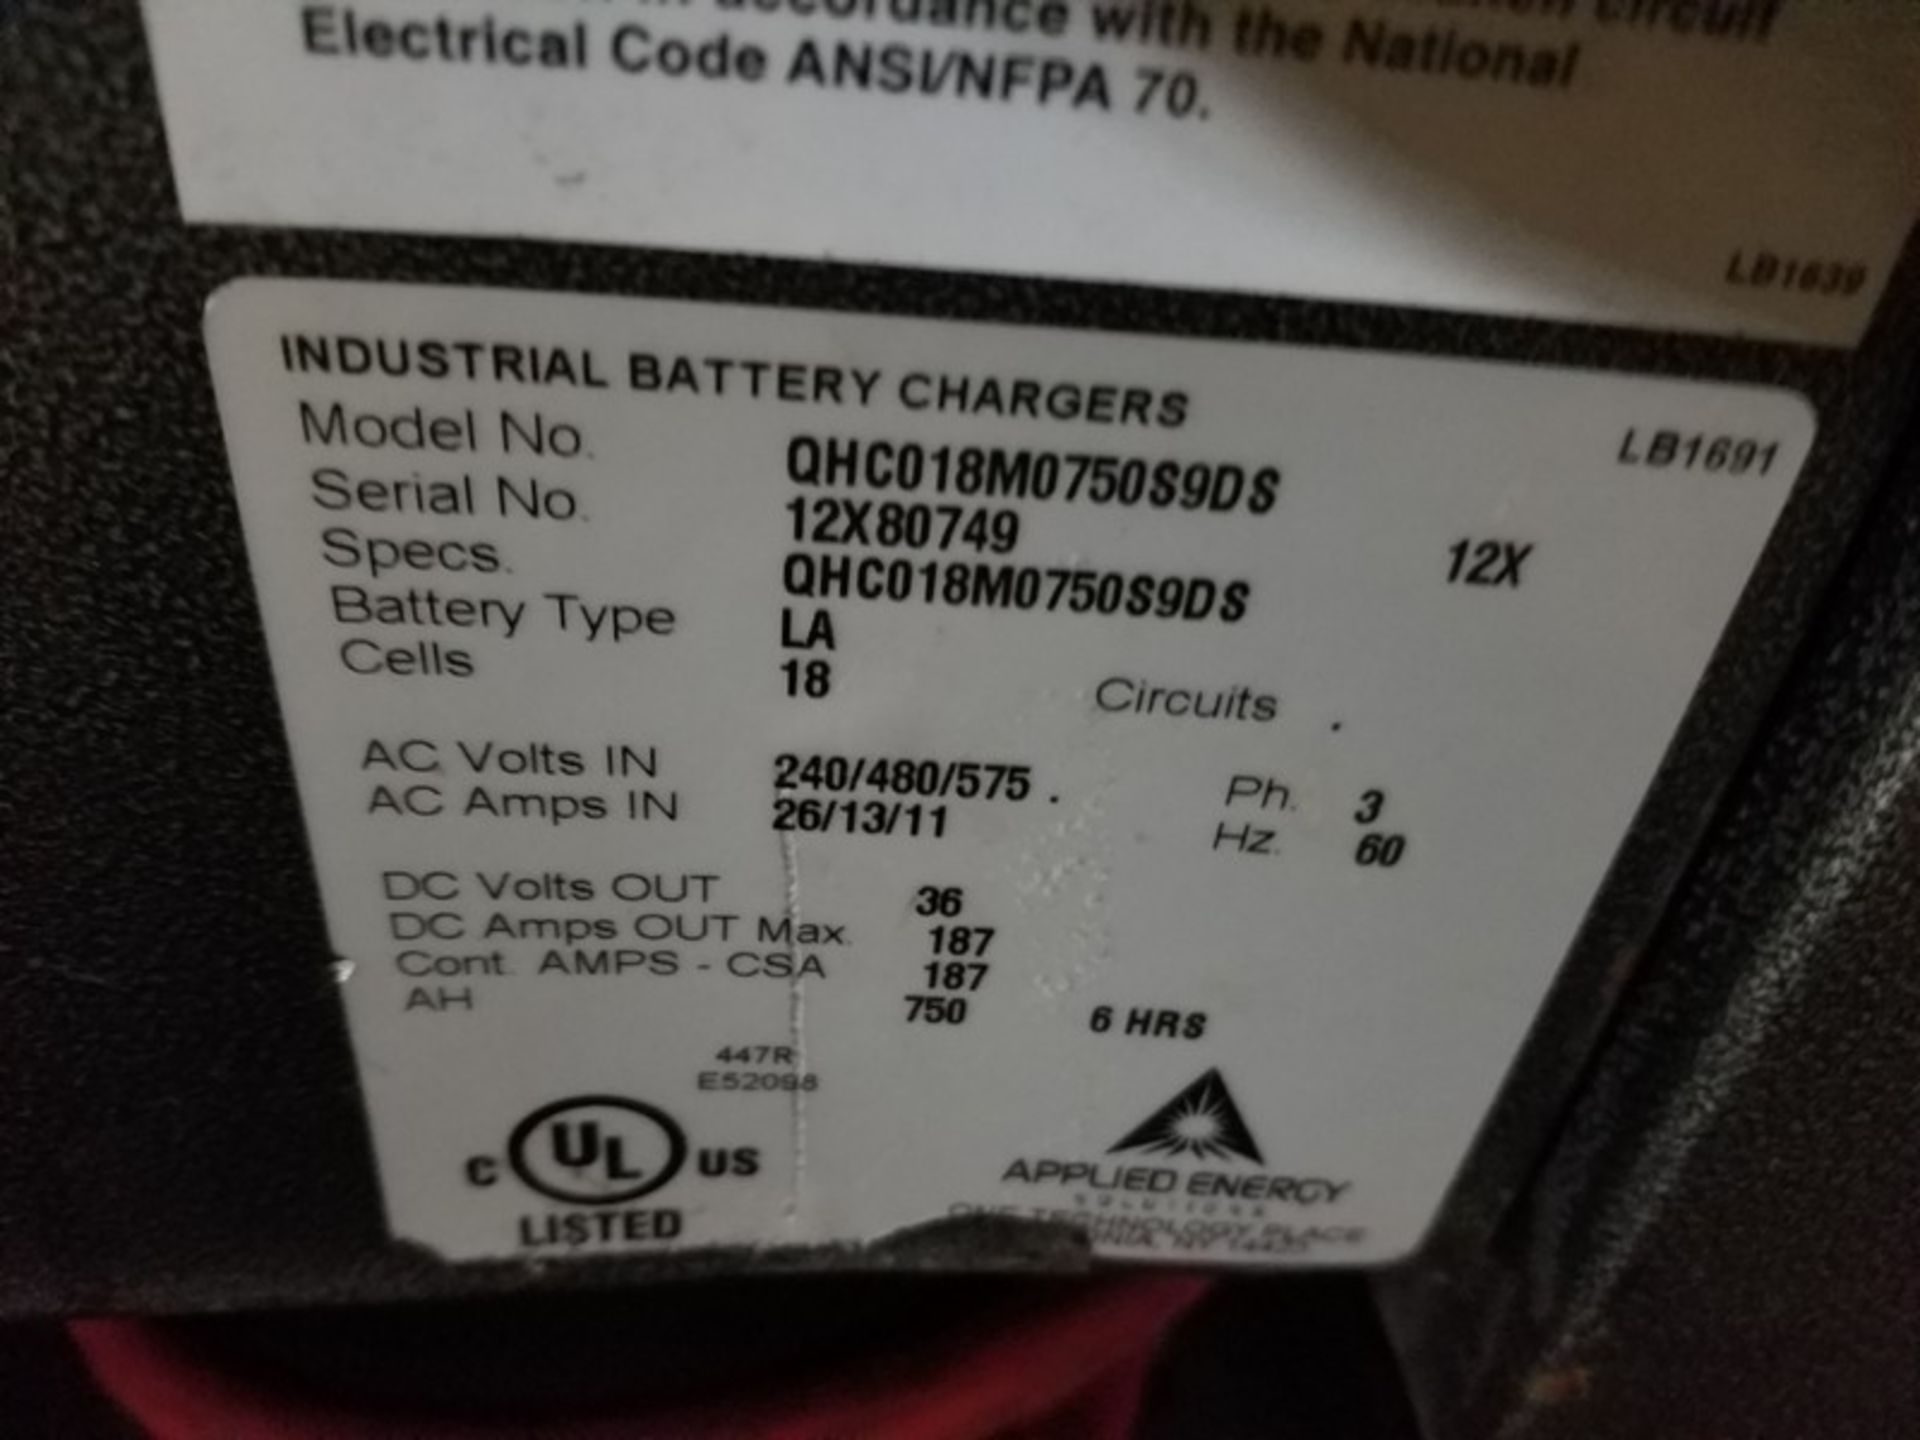 Applied Engery QHC018M075059DS forklift battery charger, serial # 12X8074, volt 240/480/575, 3- - Image 4 of 4